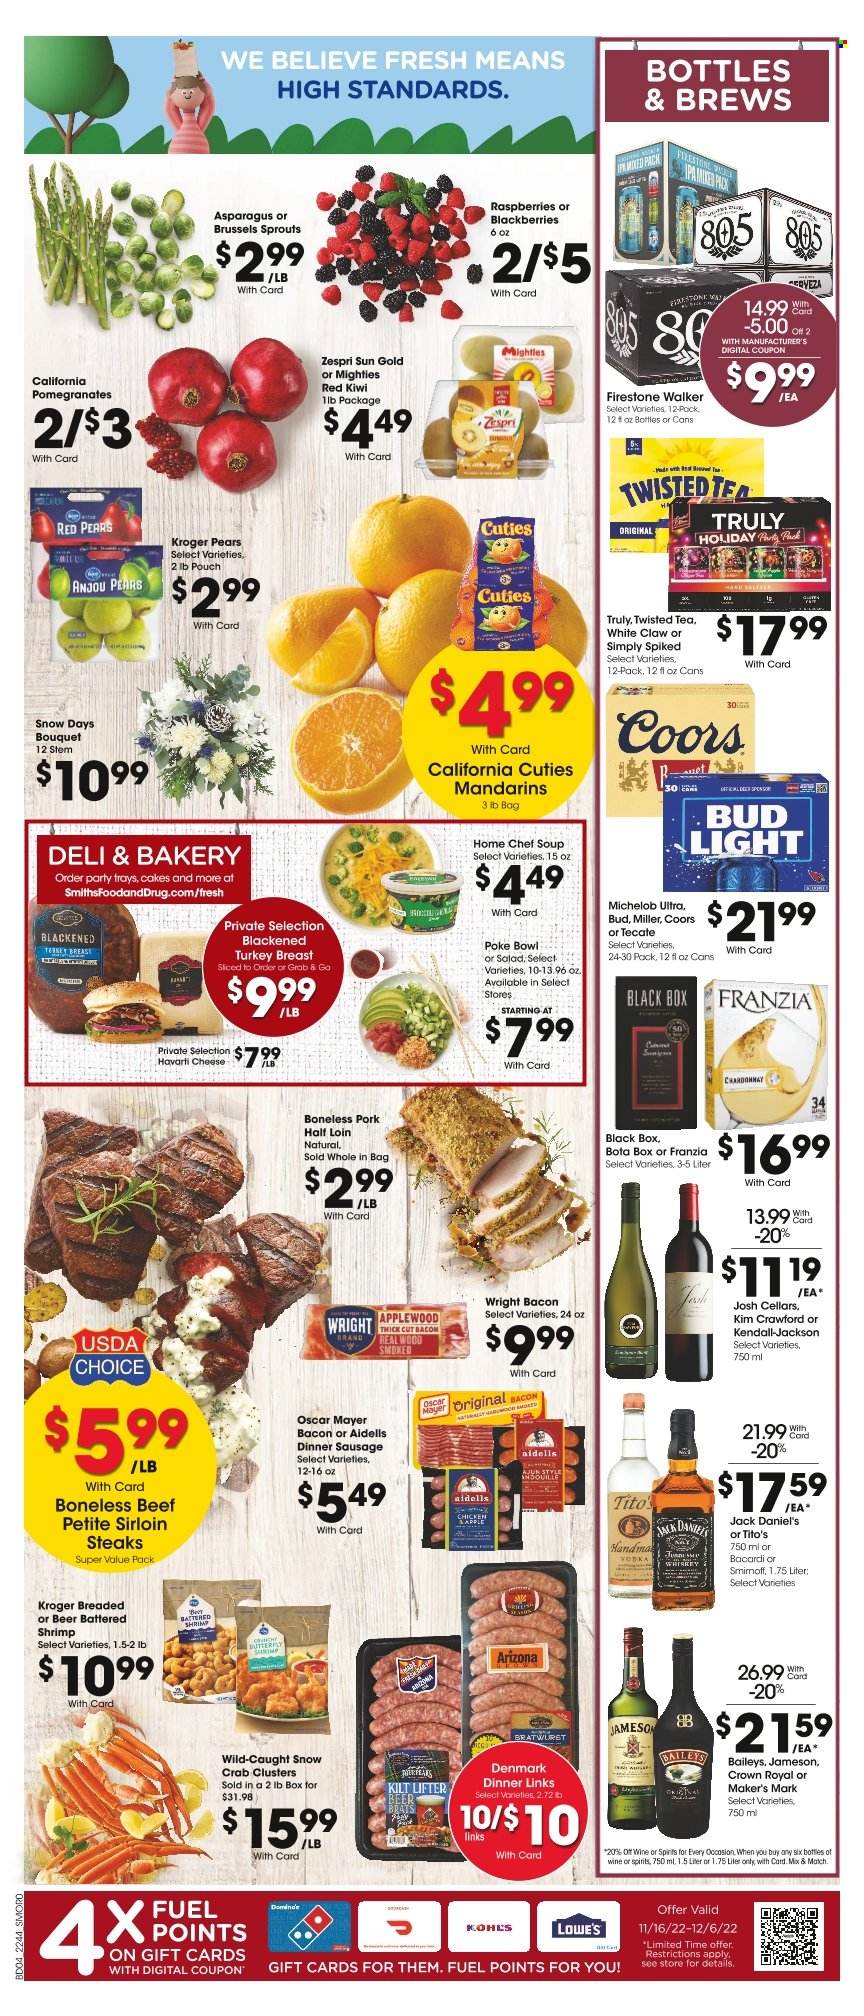 thumbnail - Smith's Flyer - 11/30/2022 - 12/06/2022 - Sales products - cake, asparagus, brussel sprouts, kiwi, mandarines, pears, crab, shrimps, Jack Daniel's, soup, bacon, Oscar Mayer, sausage, cheese, AriZona, tea, white wine, Chardonnay, wine, Bacardi, Smirnoff, whiskey, Jameson, Baileys, White Claw, TRULY, whisky, beer, Bud Light, Miller, Firestone Walker, turkey breast, steak, sirloin steak, bowl, Coors, Twisted Tea, Michelob, pomegranate. Page 5.